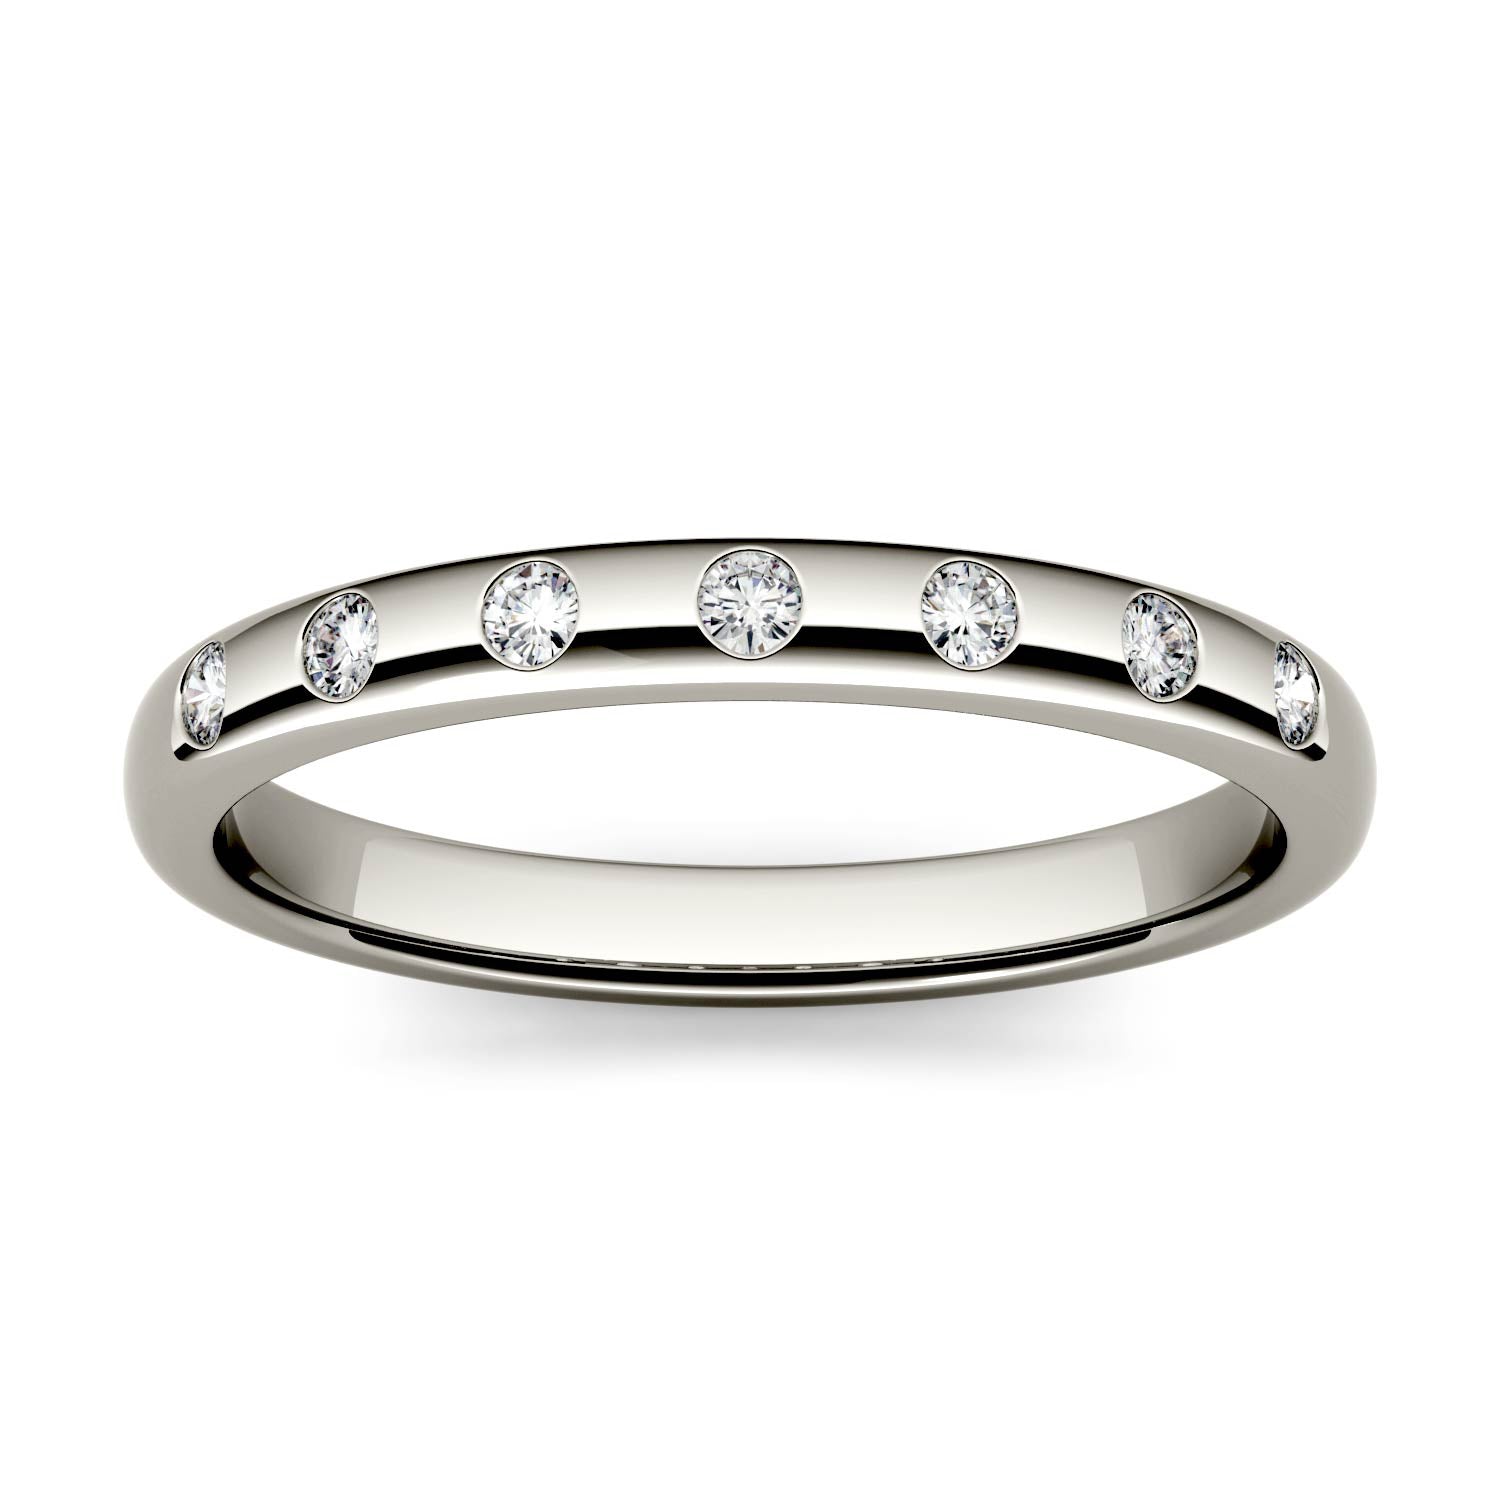 0.11 CTW DEW Round Moissanite Stackable Ring in 14K White Gold